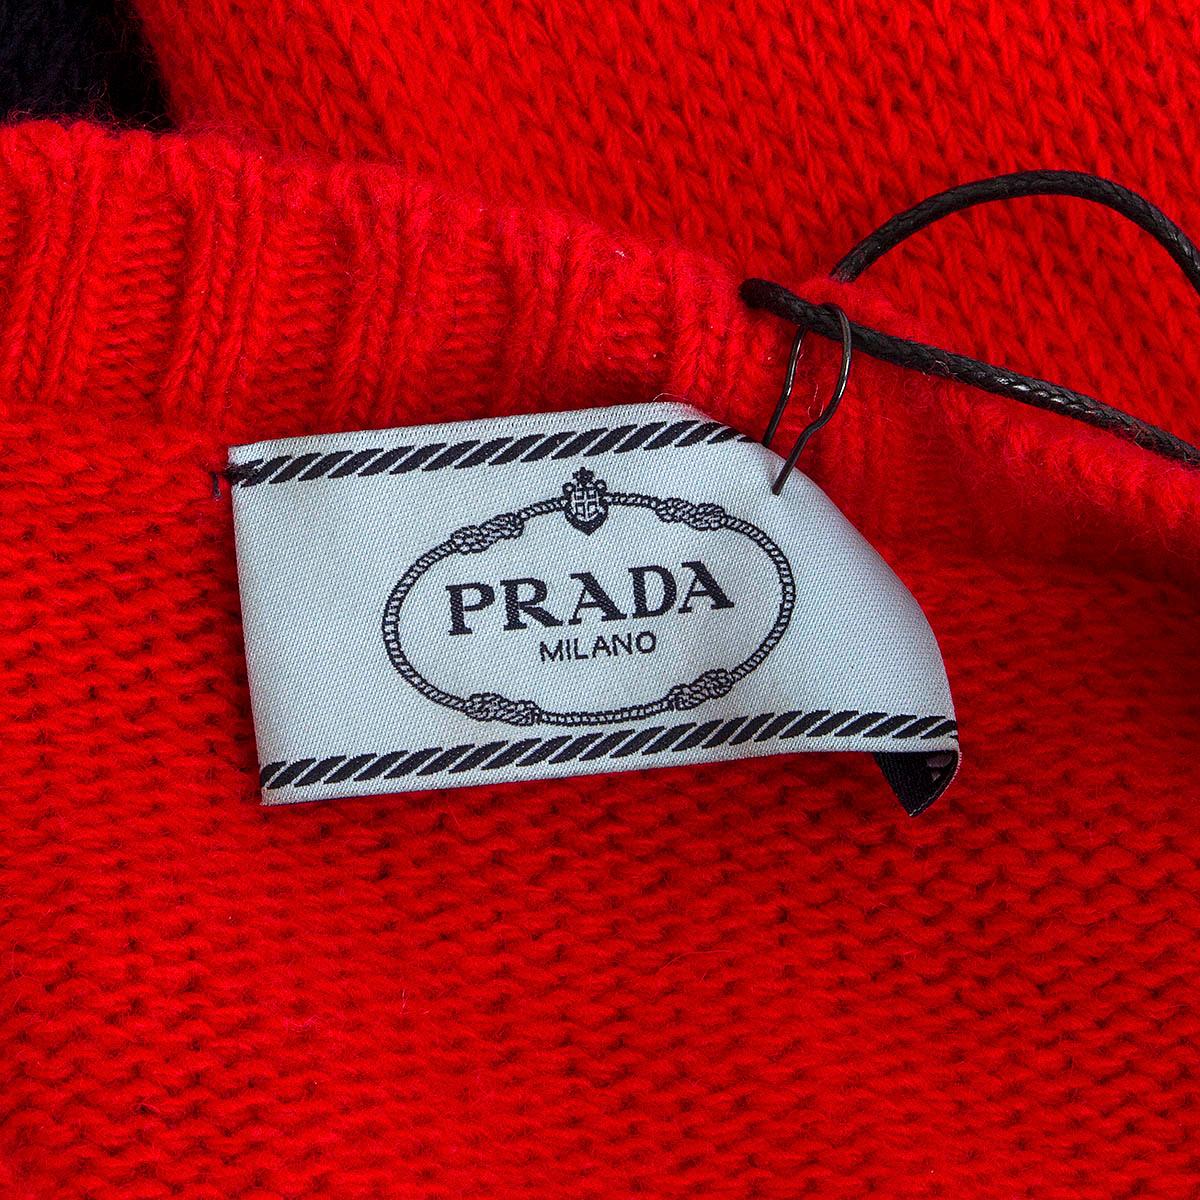 PRADA blue & red WOOL 2018 BANANA Crewneck Sweater 44 L In Excellent Condition For Sale In Zürich, CH